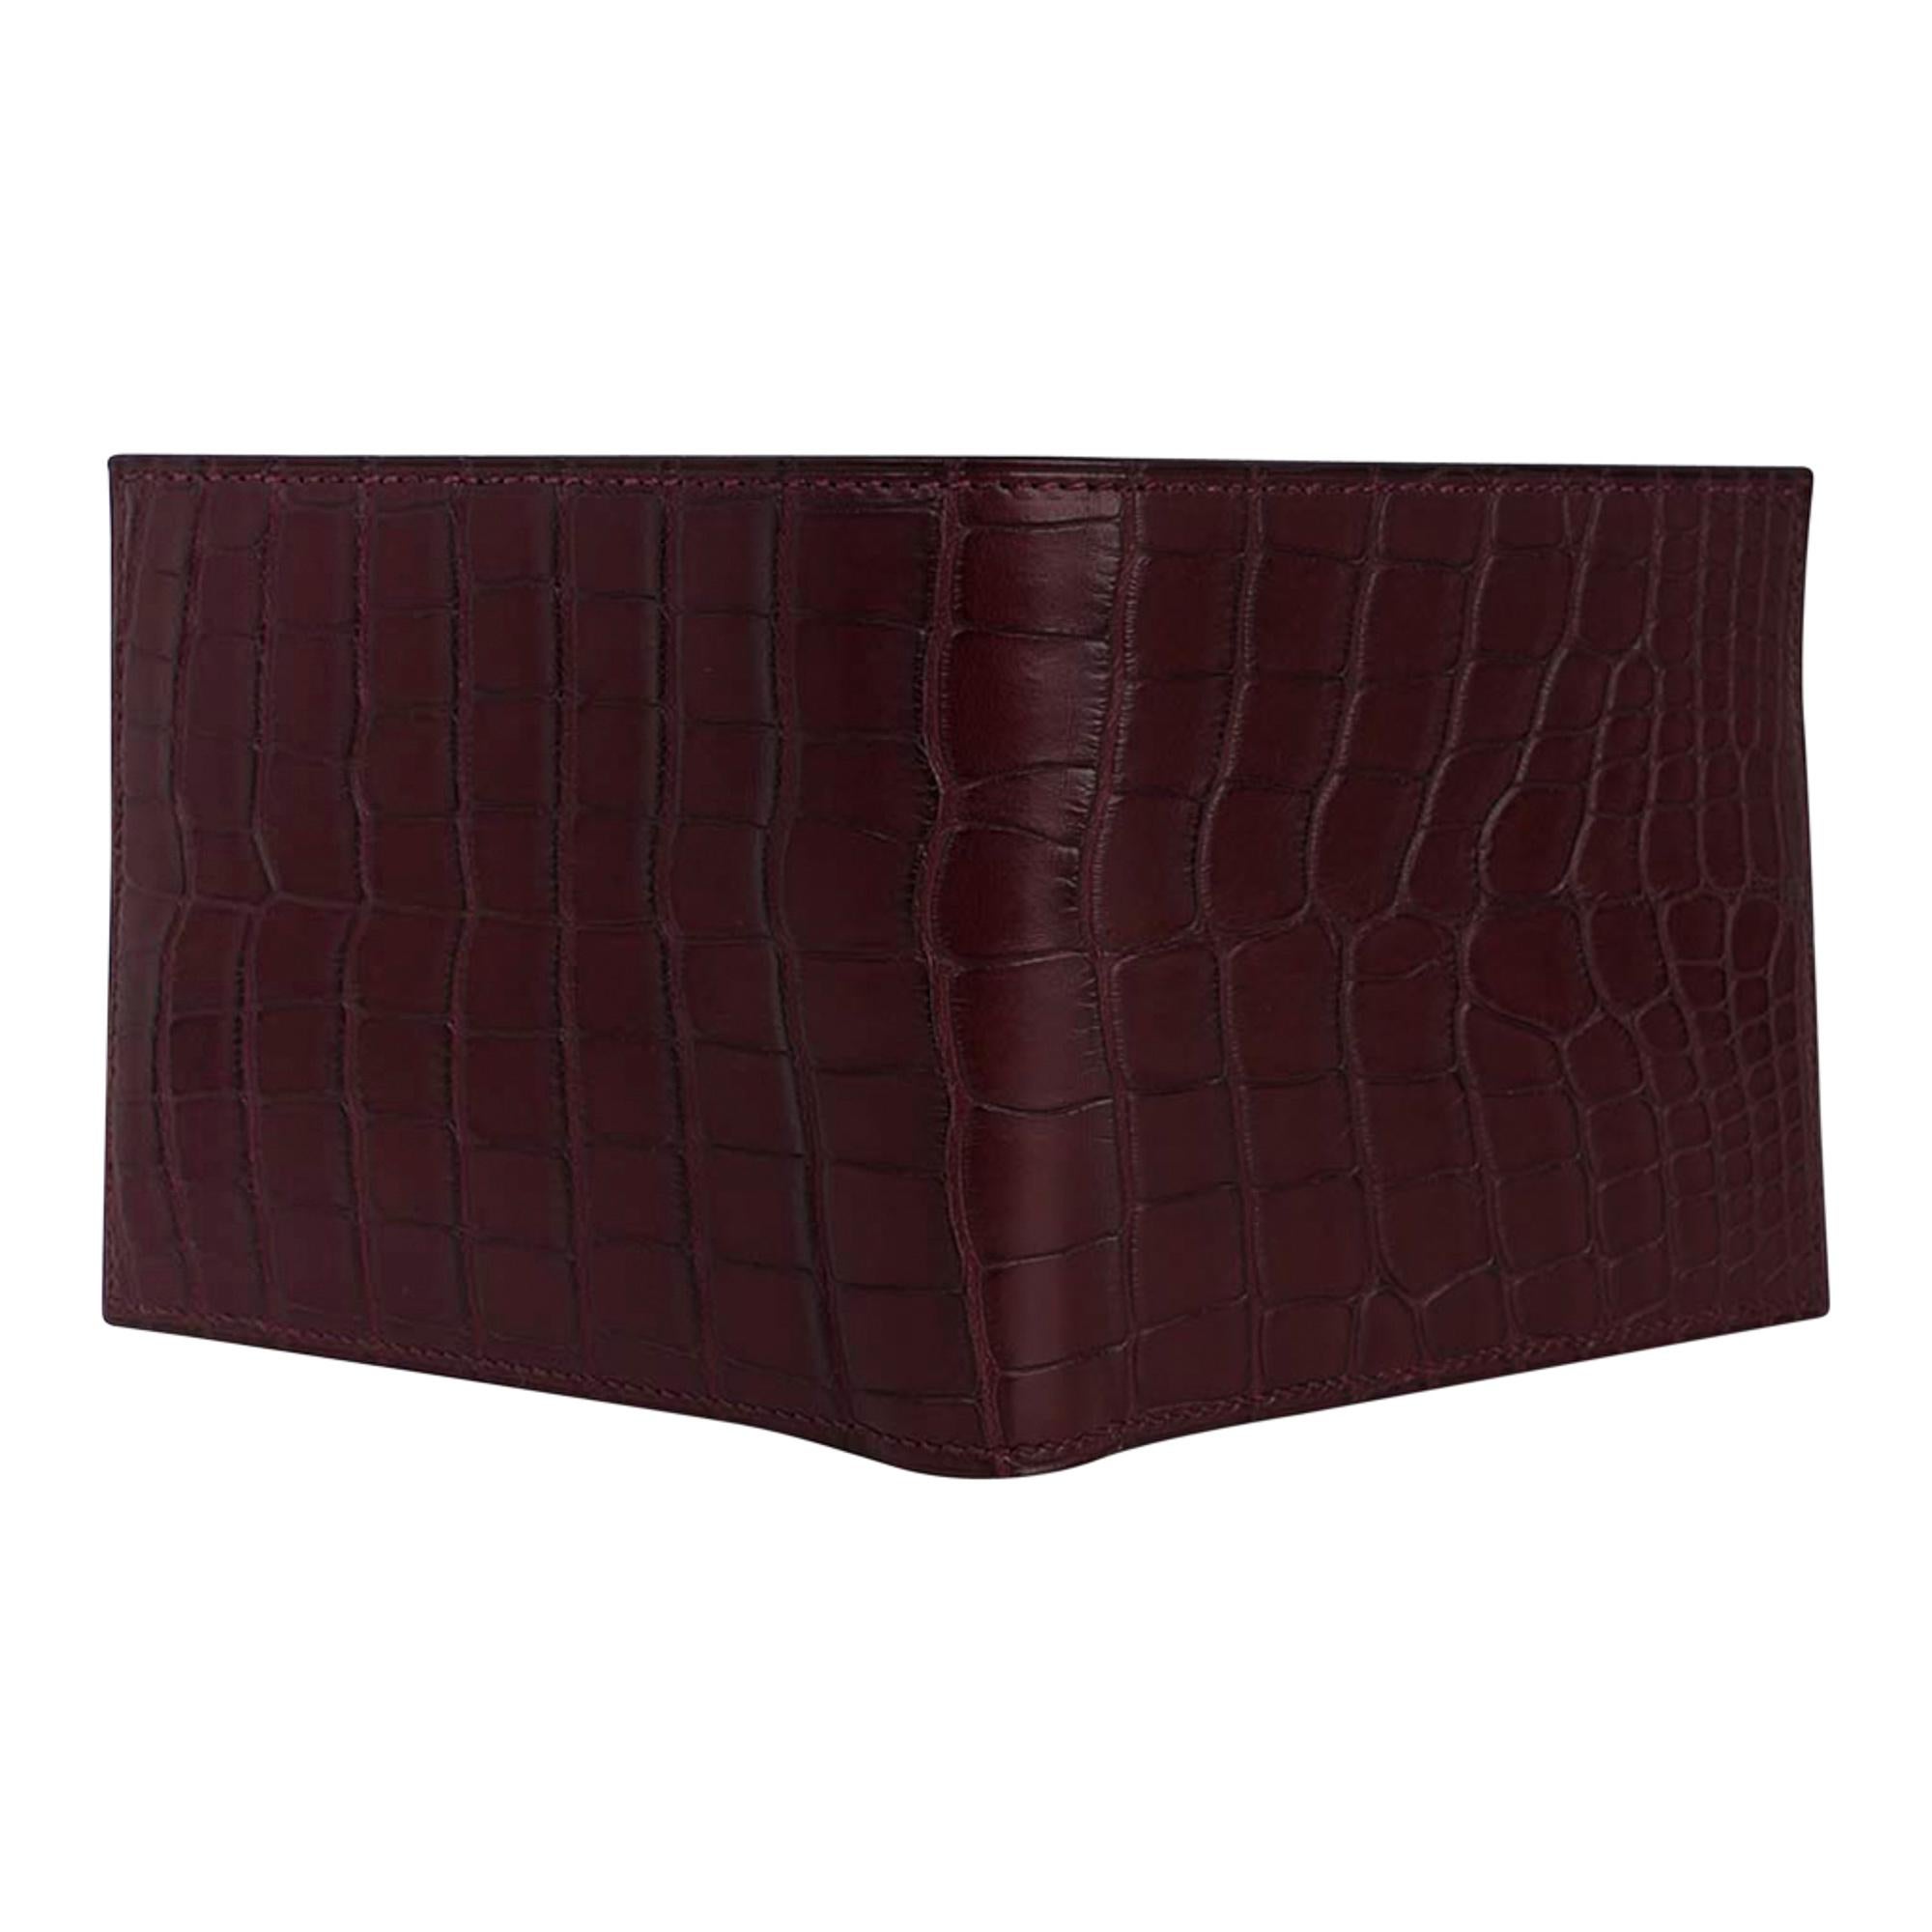 Mightychic offers an Hermes Men's MC2 Copernic compact bi-fold wallet featured in rich matte Bordeaux Alligator.
Interior is chevre with eight credit card slots, two flat pockets and one paper money slot.
Sleek clean lines.
HERMES Paris Made in